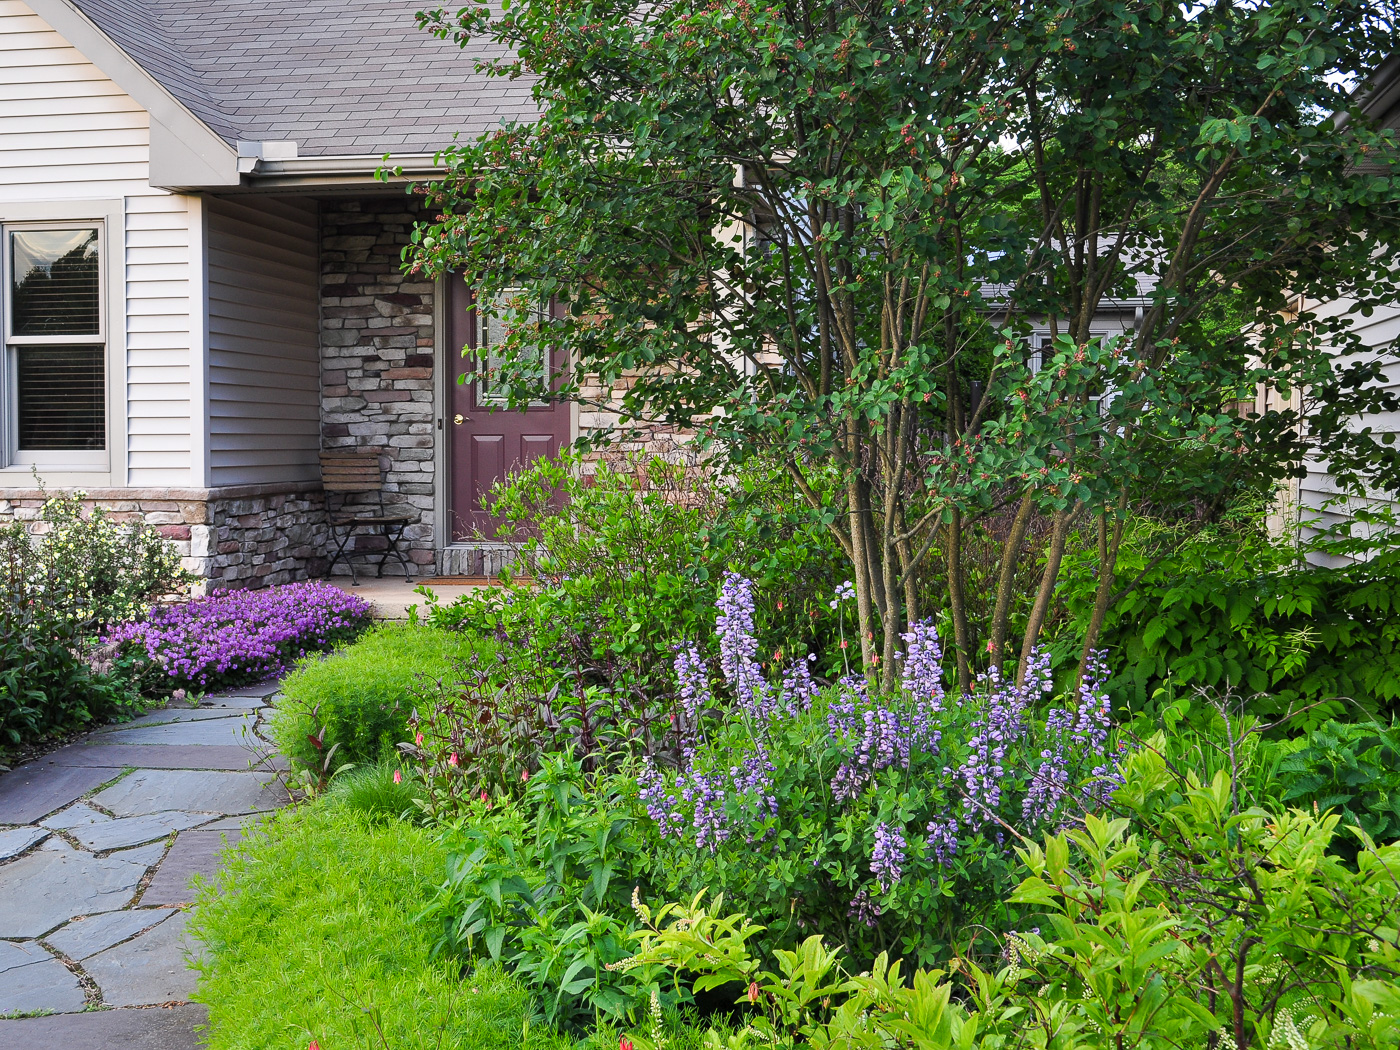 Natural flagstone walk leading to home front porch through natural garden mixed plantings